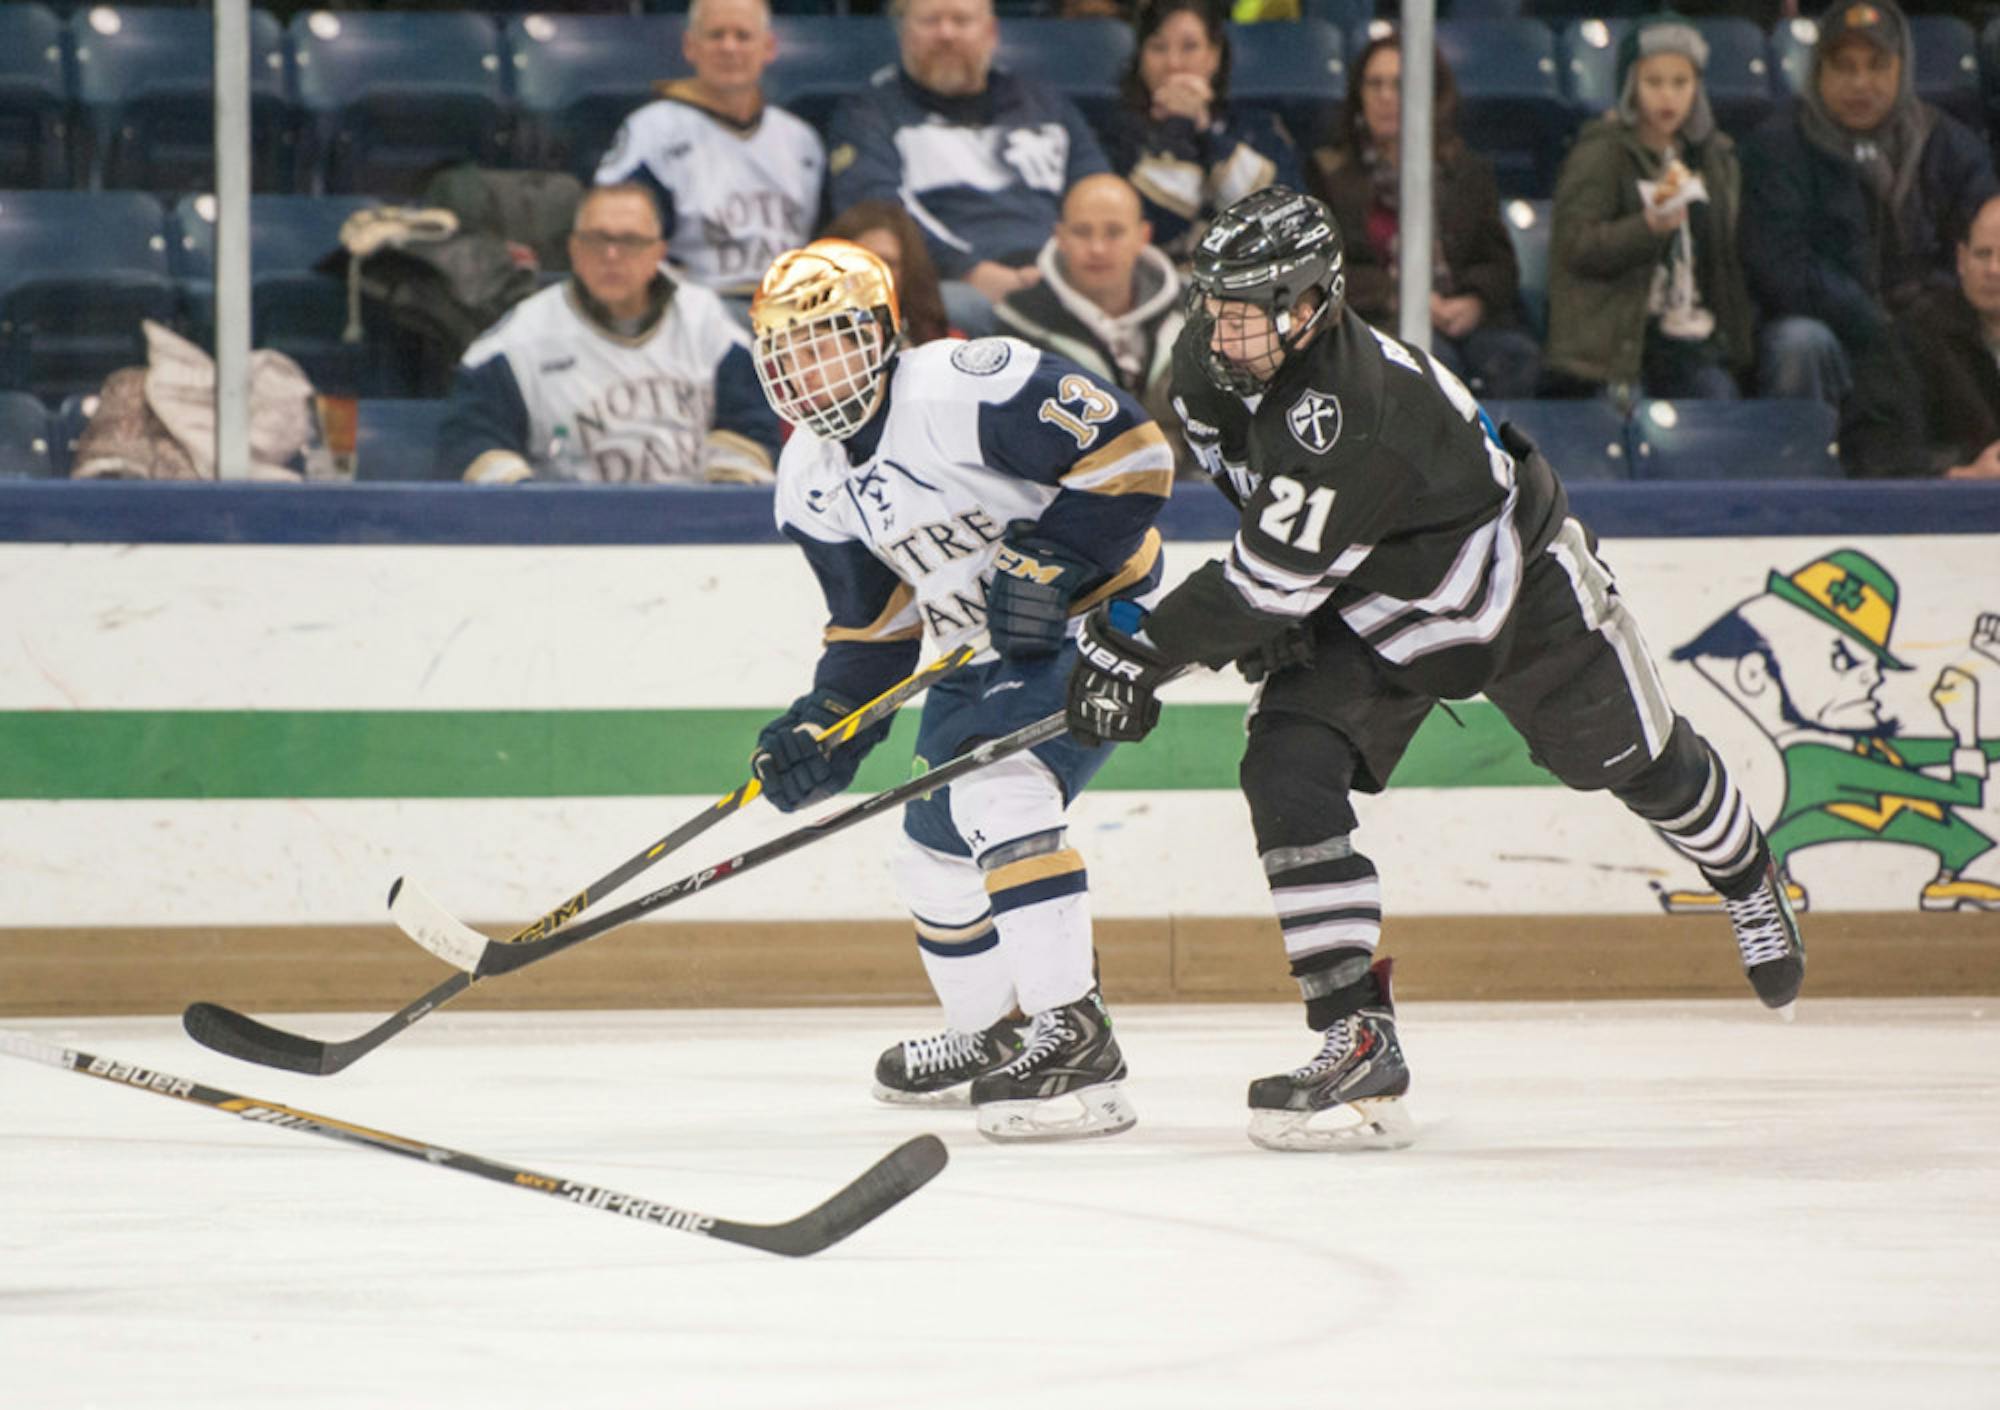 Irish sophomore center Vince Hinostroza awaits a pass during Notre Dame’s 2-0 home victory over Providence on Friday.